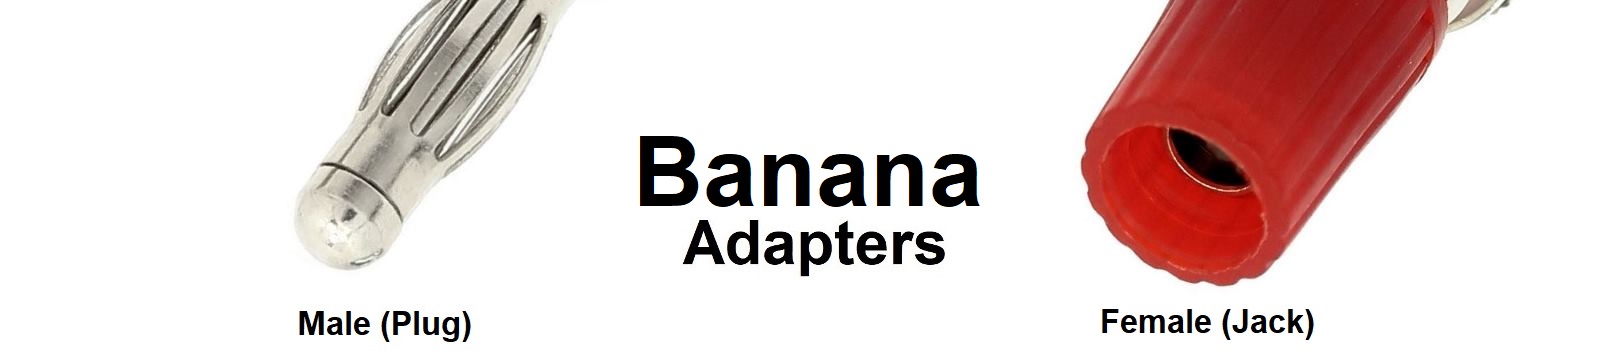 Banana Adapters Category Banner - Max-Gain Systems, Inc.